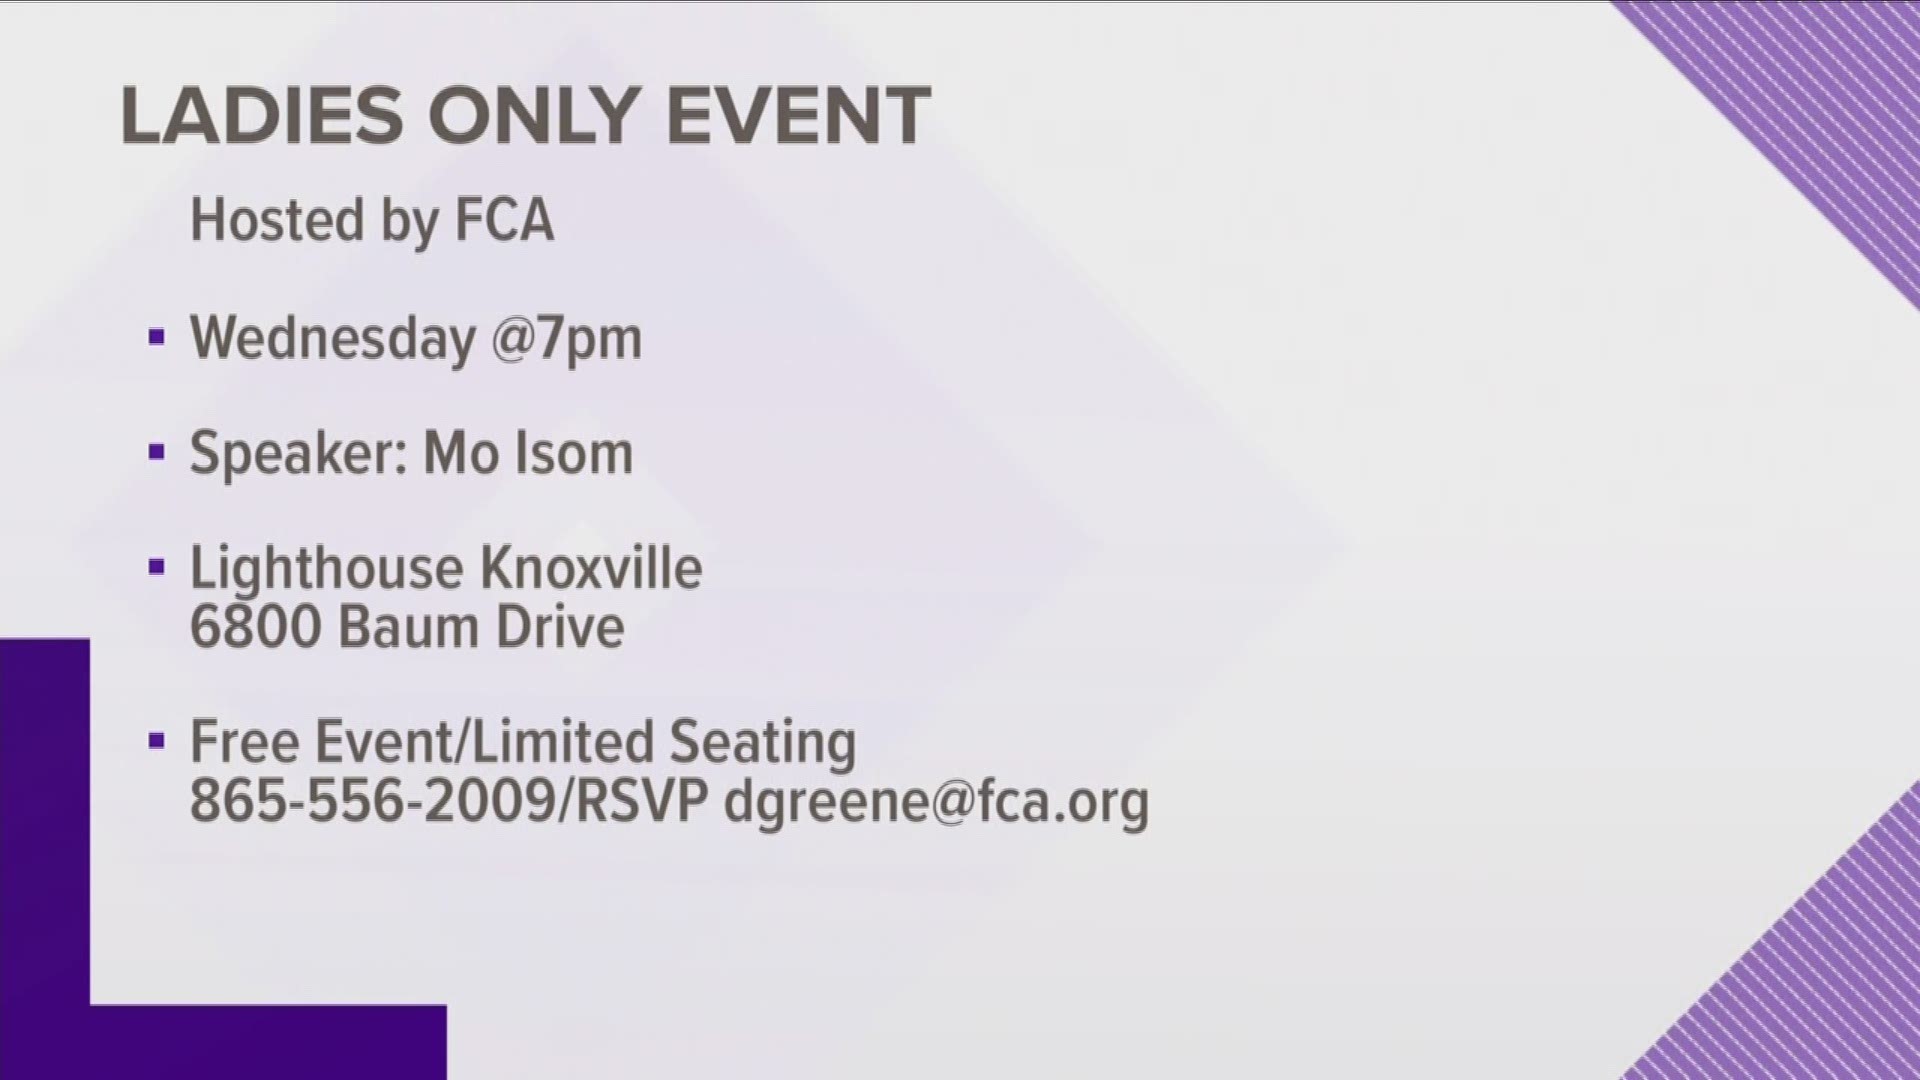 The free event is Wednesday at 7 p.m. at the Lighthouse Knoxville. RSVP to dgreene@fca.org.